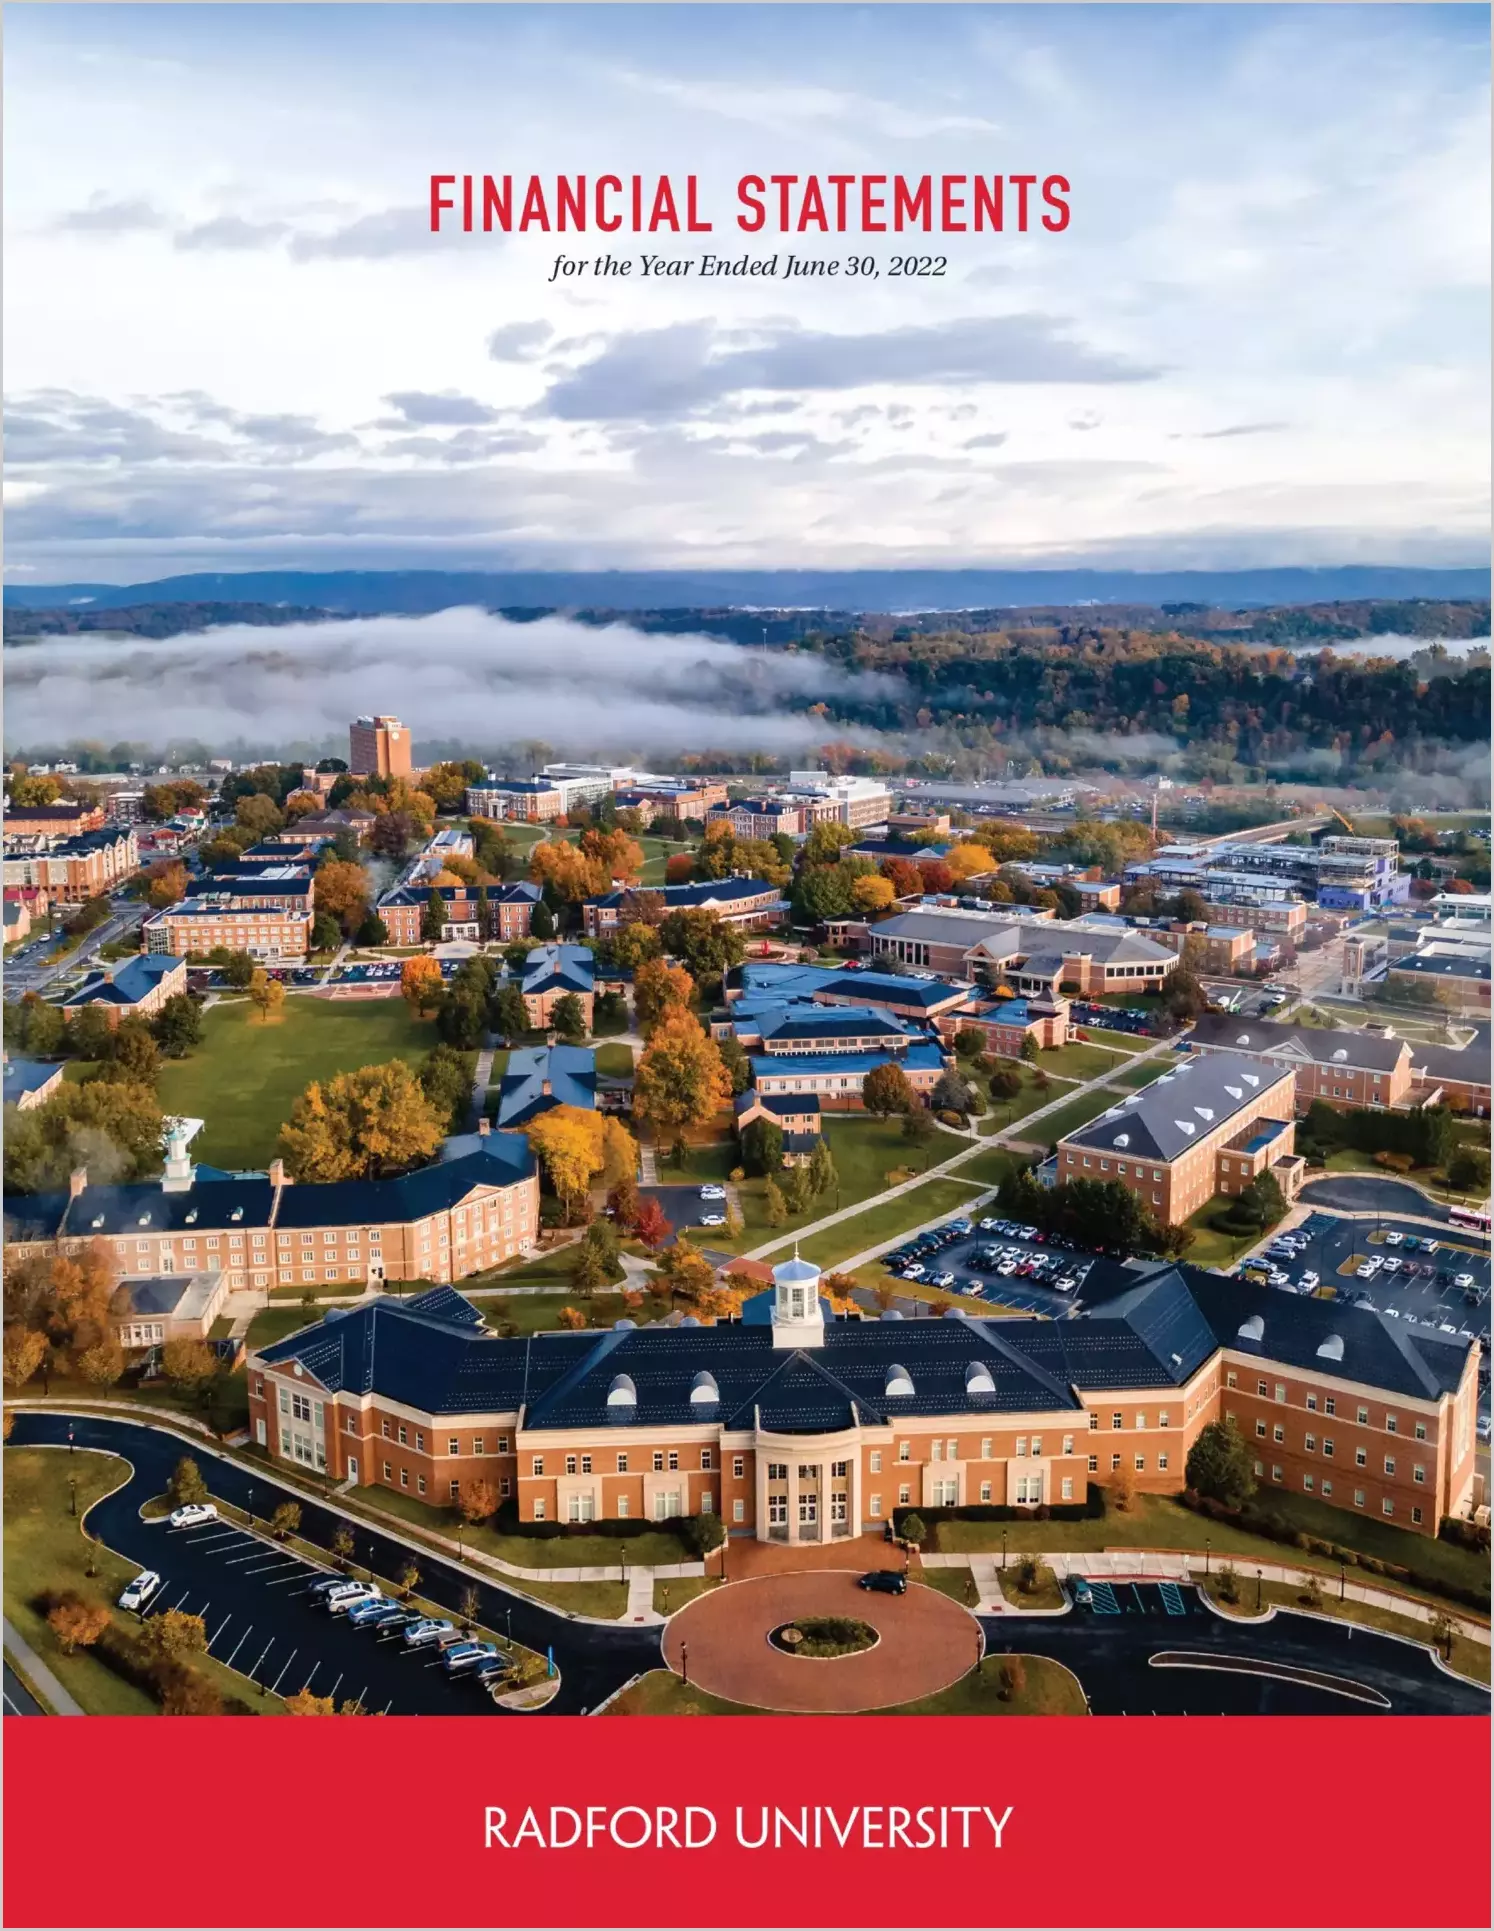 Radford University Financial Statements for the year ended June 30, 2022